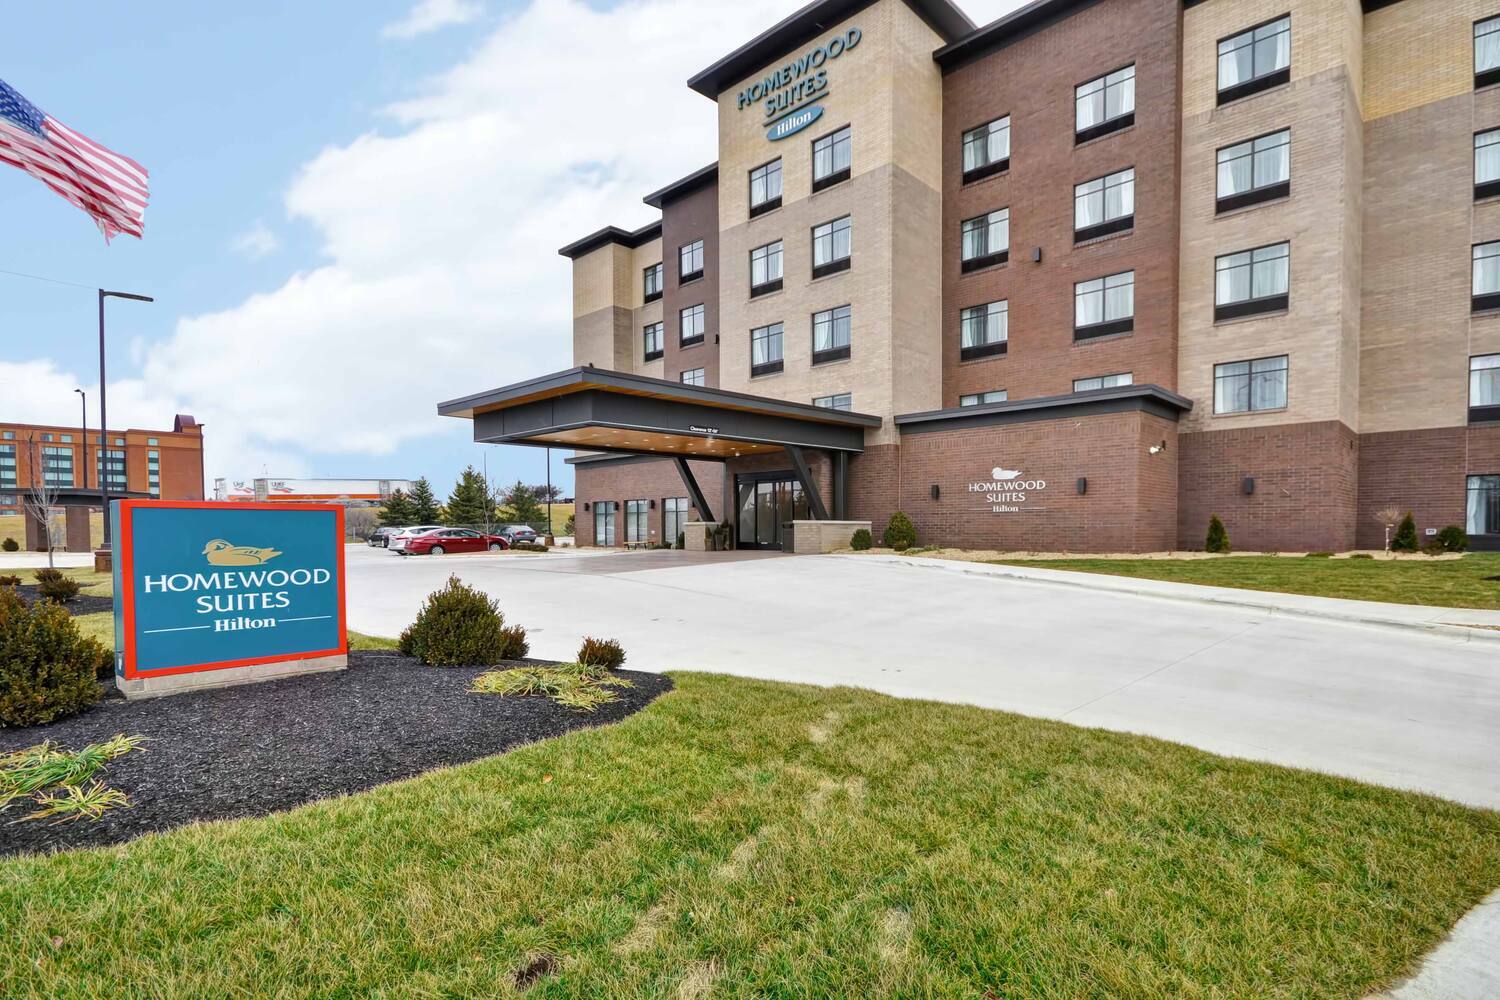 Photo of Homewood Suites West Chester/Union Centre, West Chester, OH